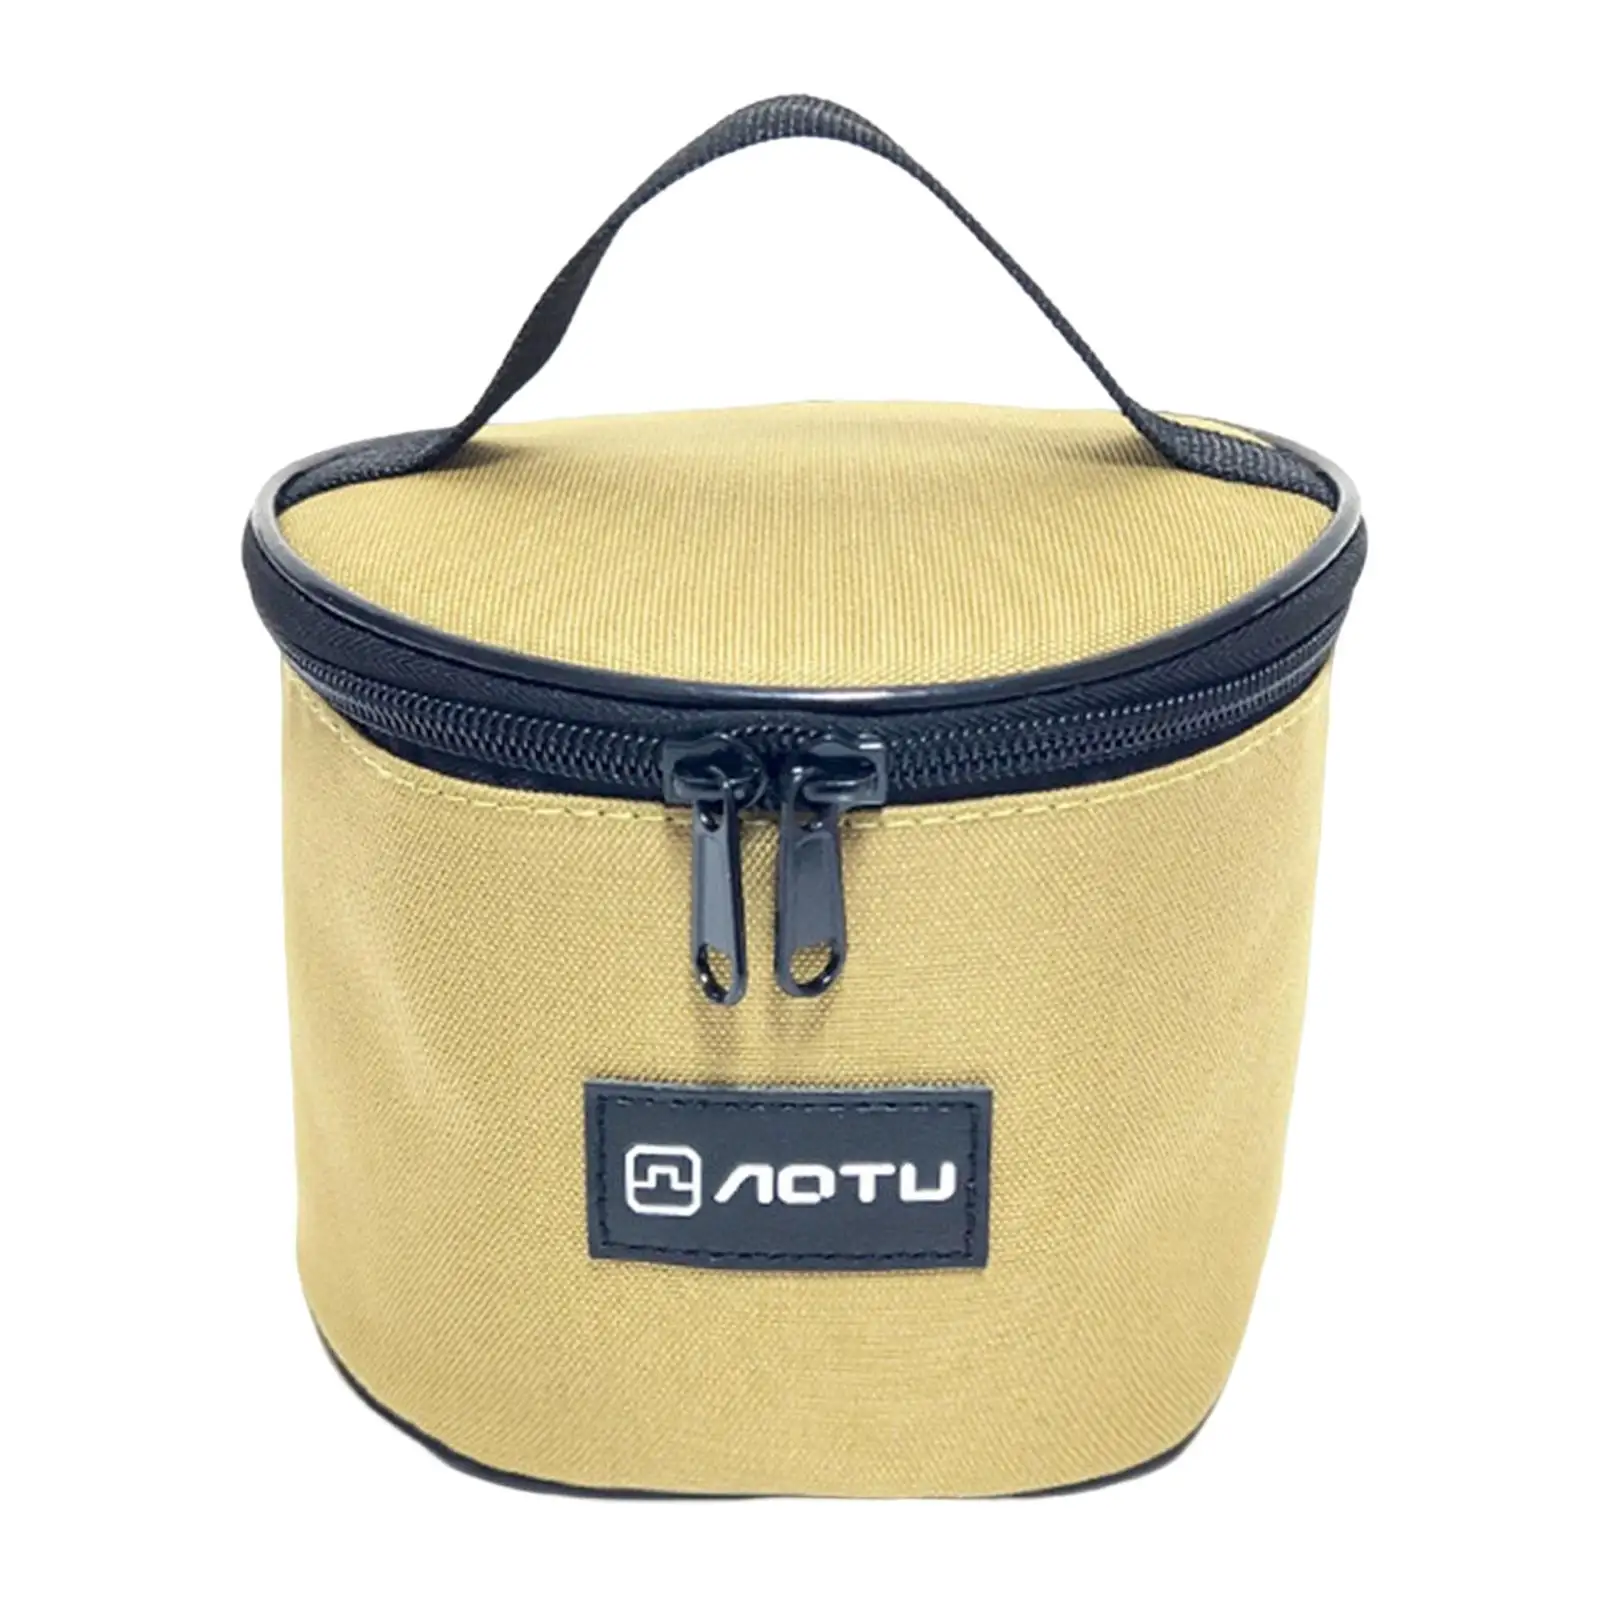 Oxford Bowl Storage Bag, Carry Case, with Handle Activities, Hiking, Accessories